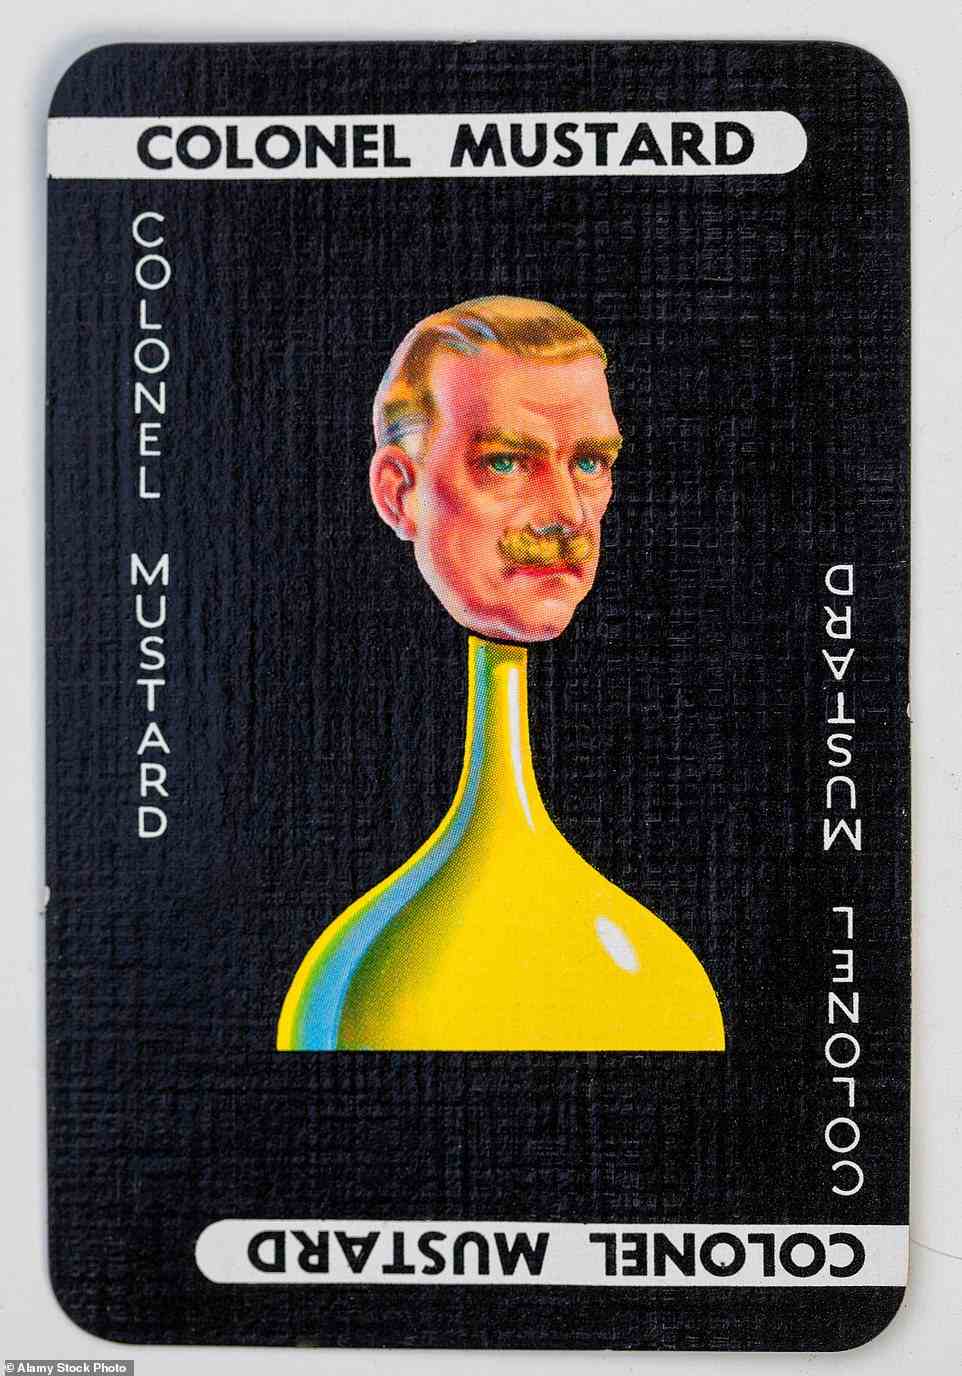 Colonel Mustard playing card from a vintage game of Cluedo